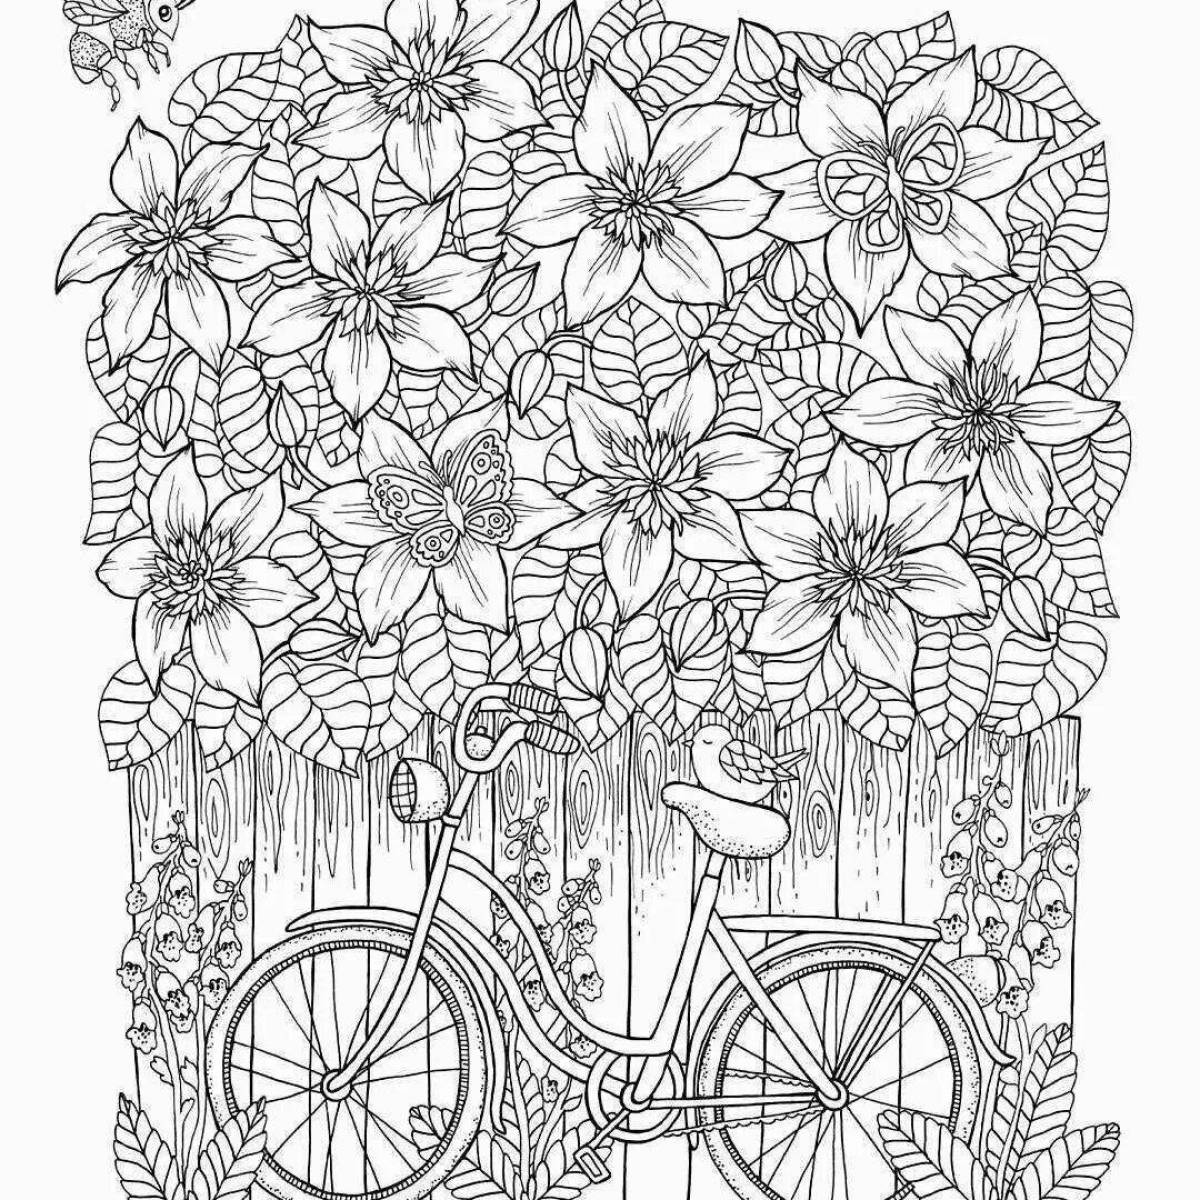 Blooming coloring book for adults